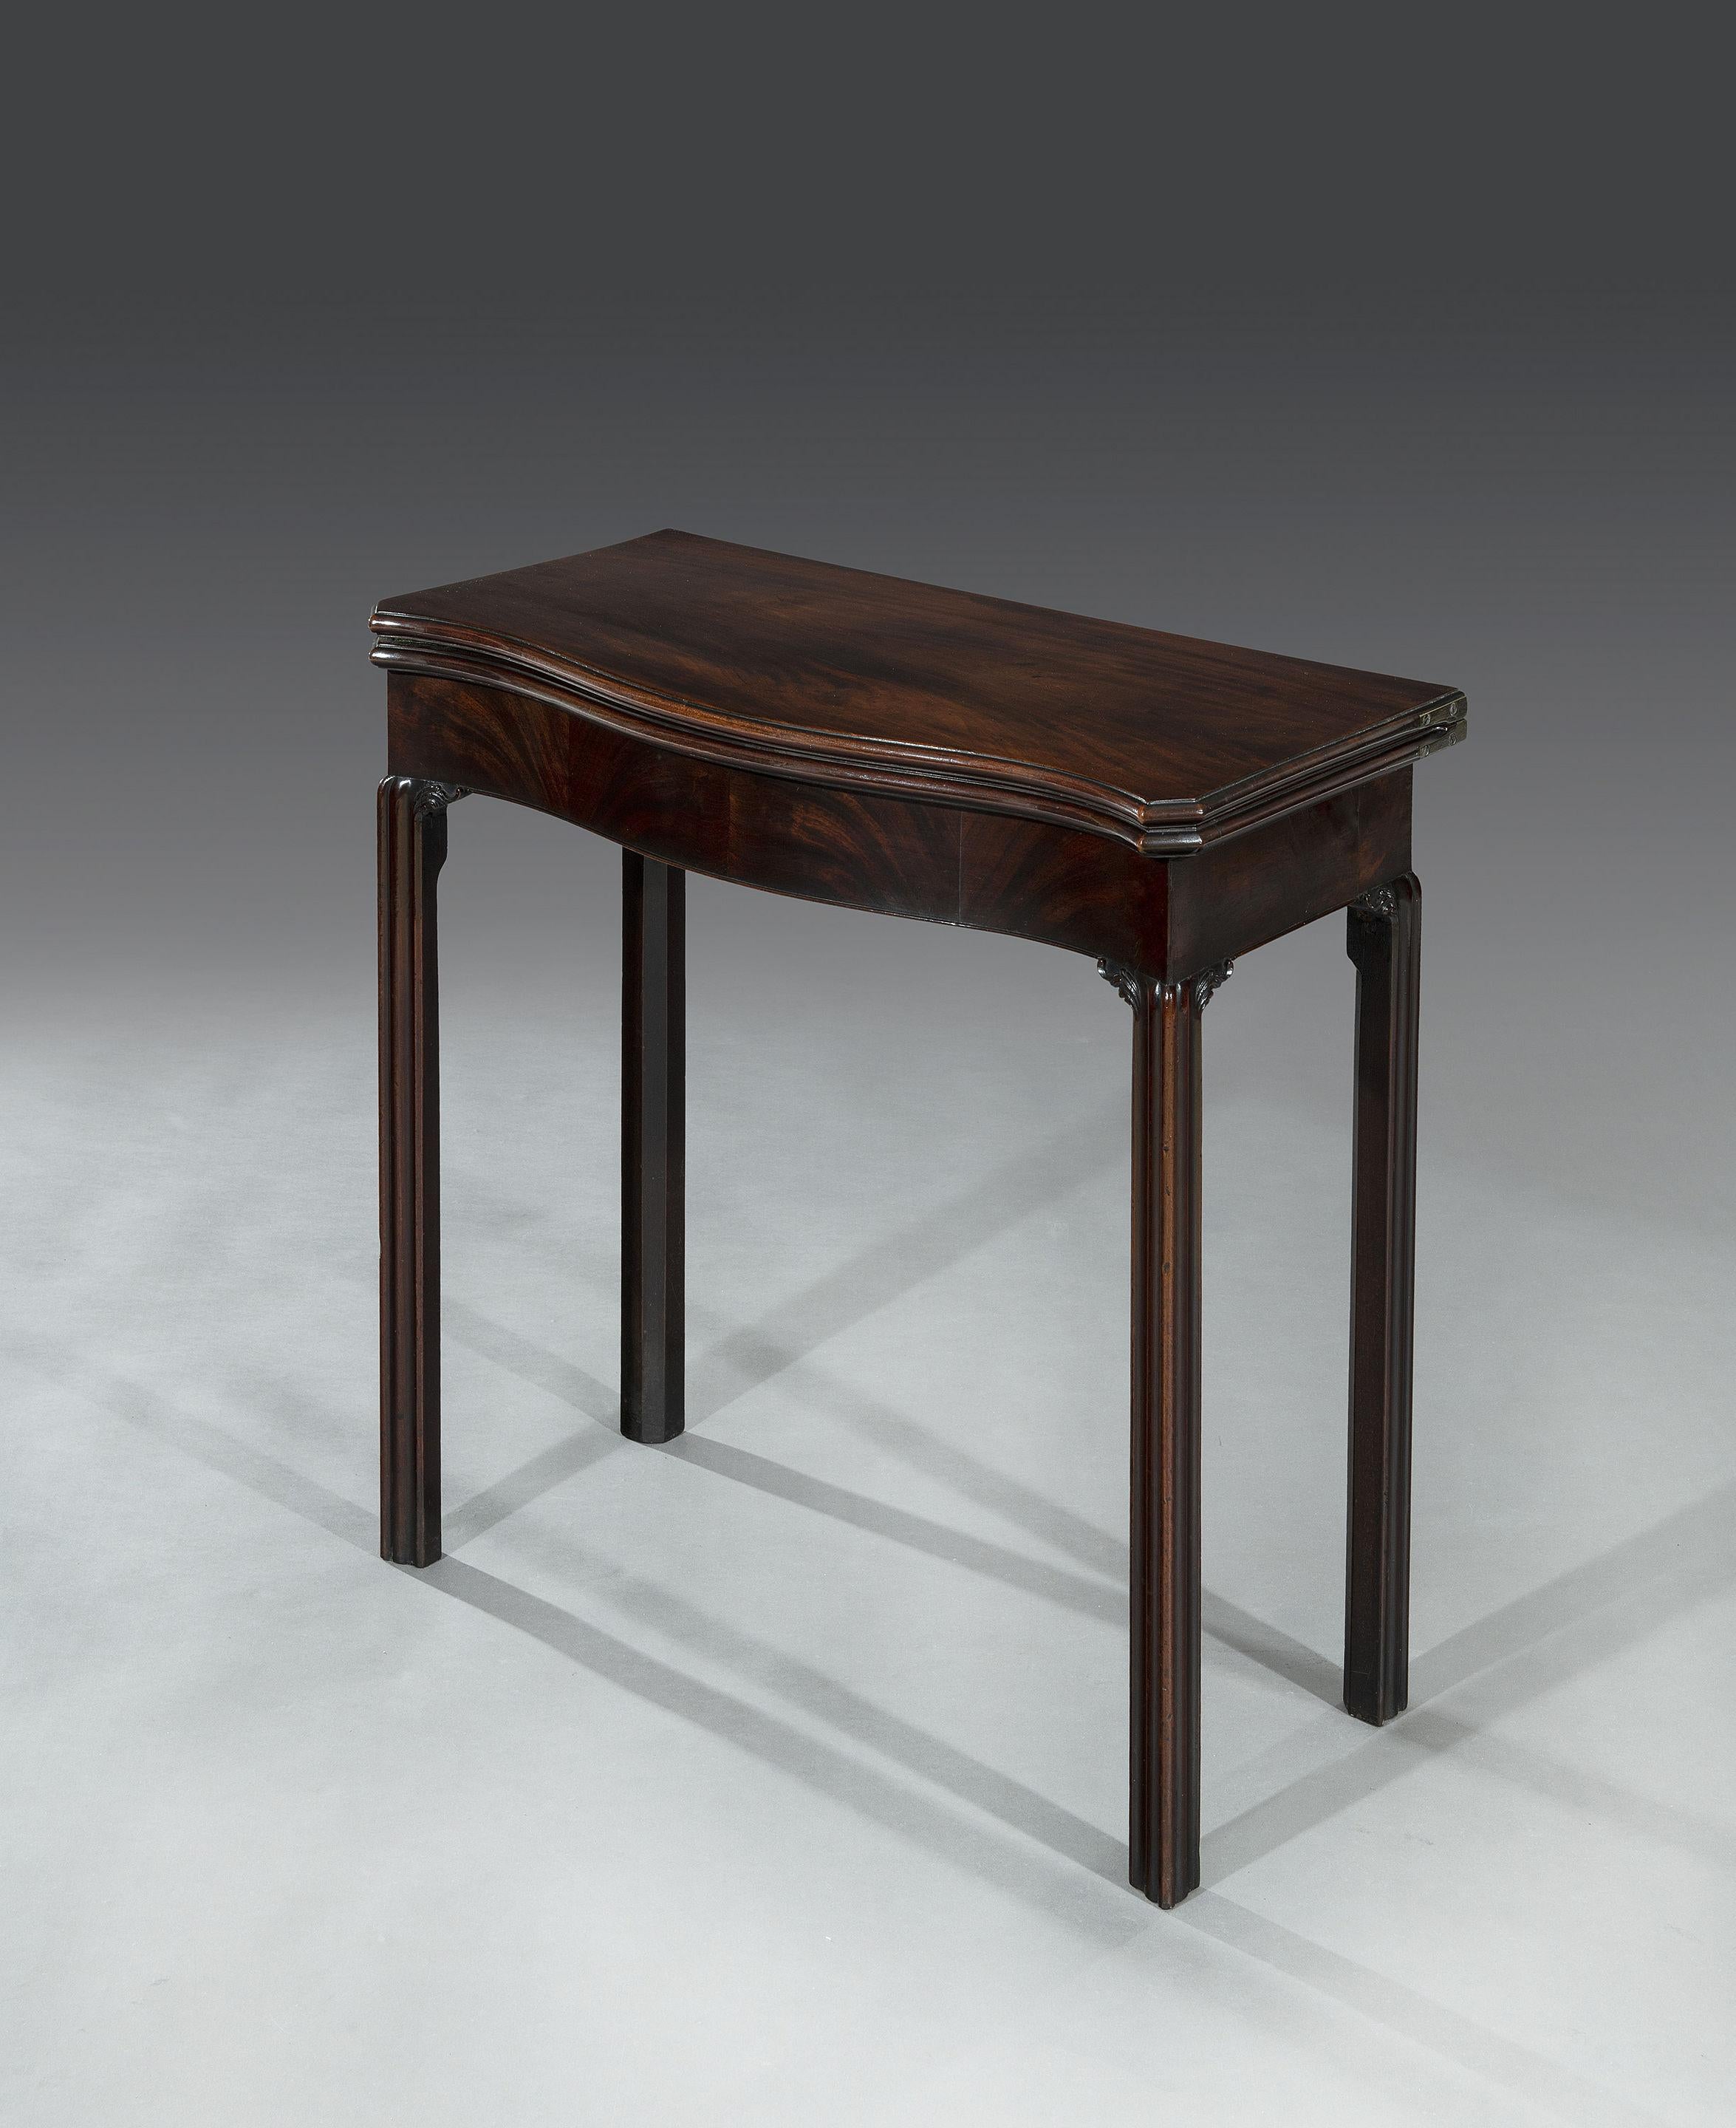 The serpentine veneered top opens to reveal a green baize playing surface and is supported by a single gate leg action to the rear. When the gate leg is used it reveals a concealed single oak lined drawer. The rounded moulded edge sits above the